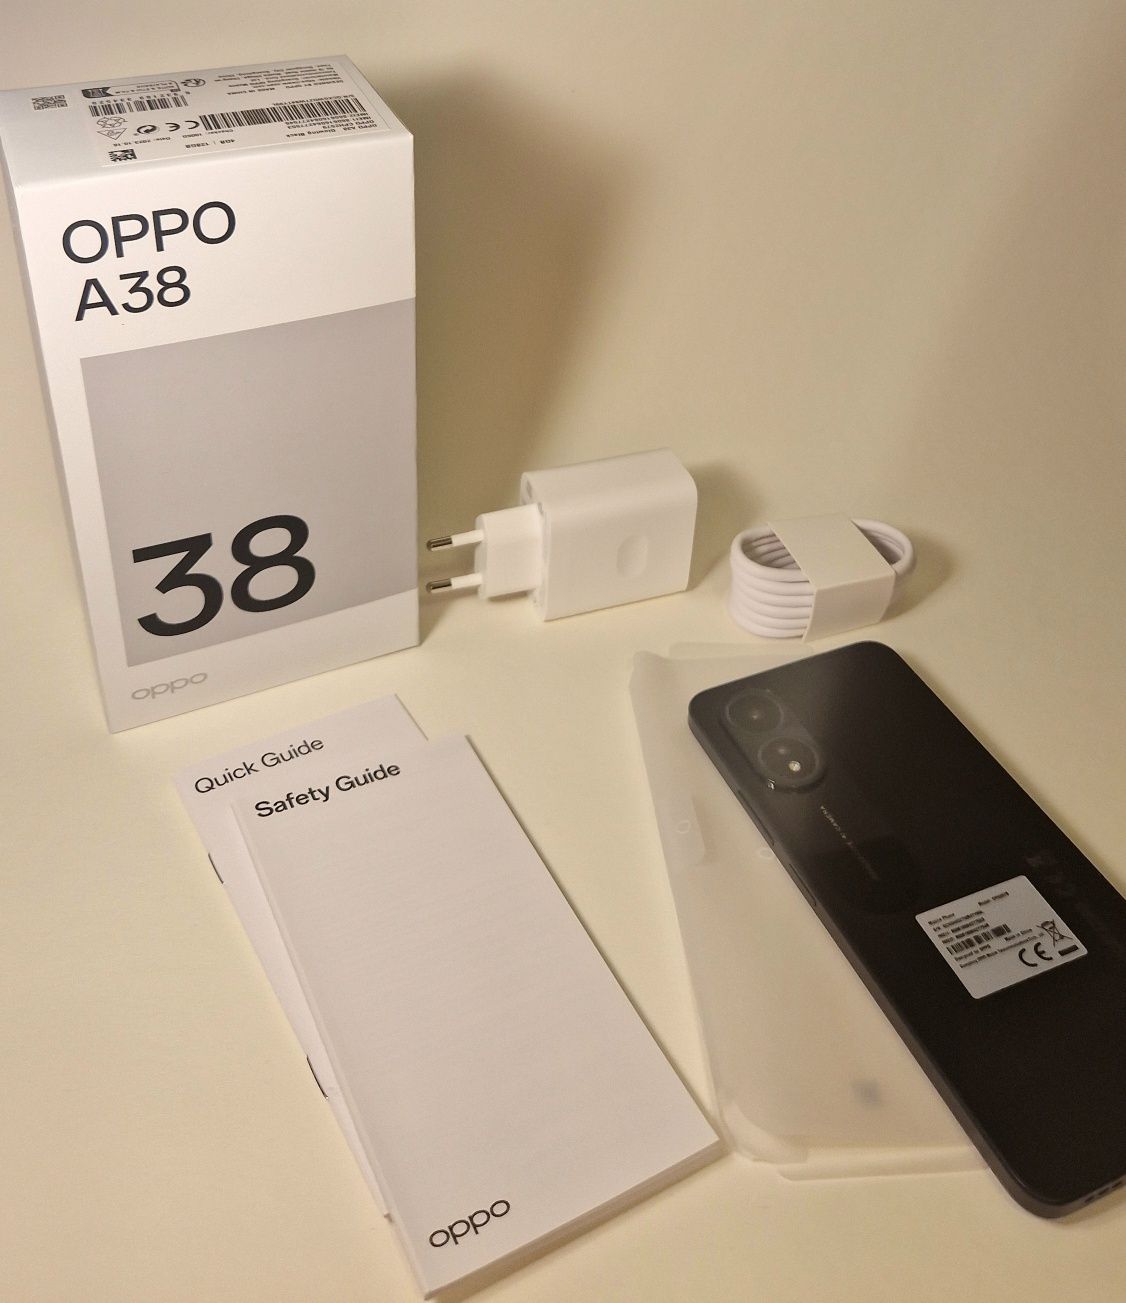 Nowy Oppo A38 komplet [4GB/128GB]